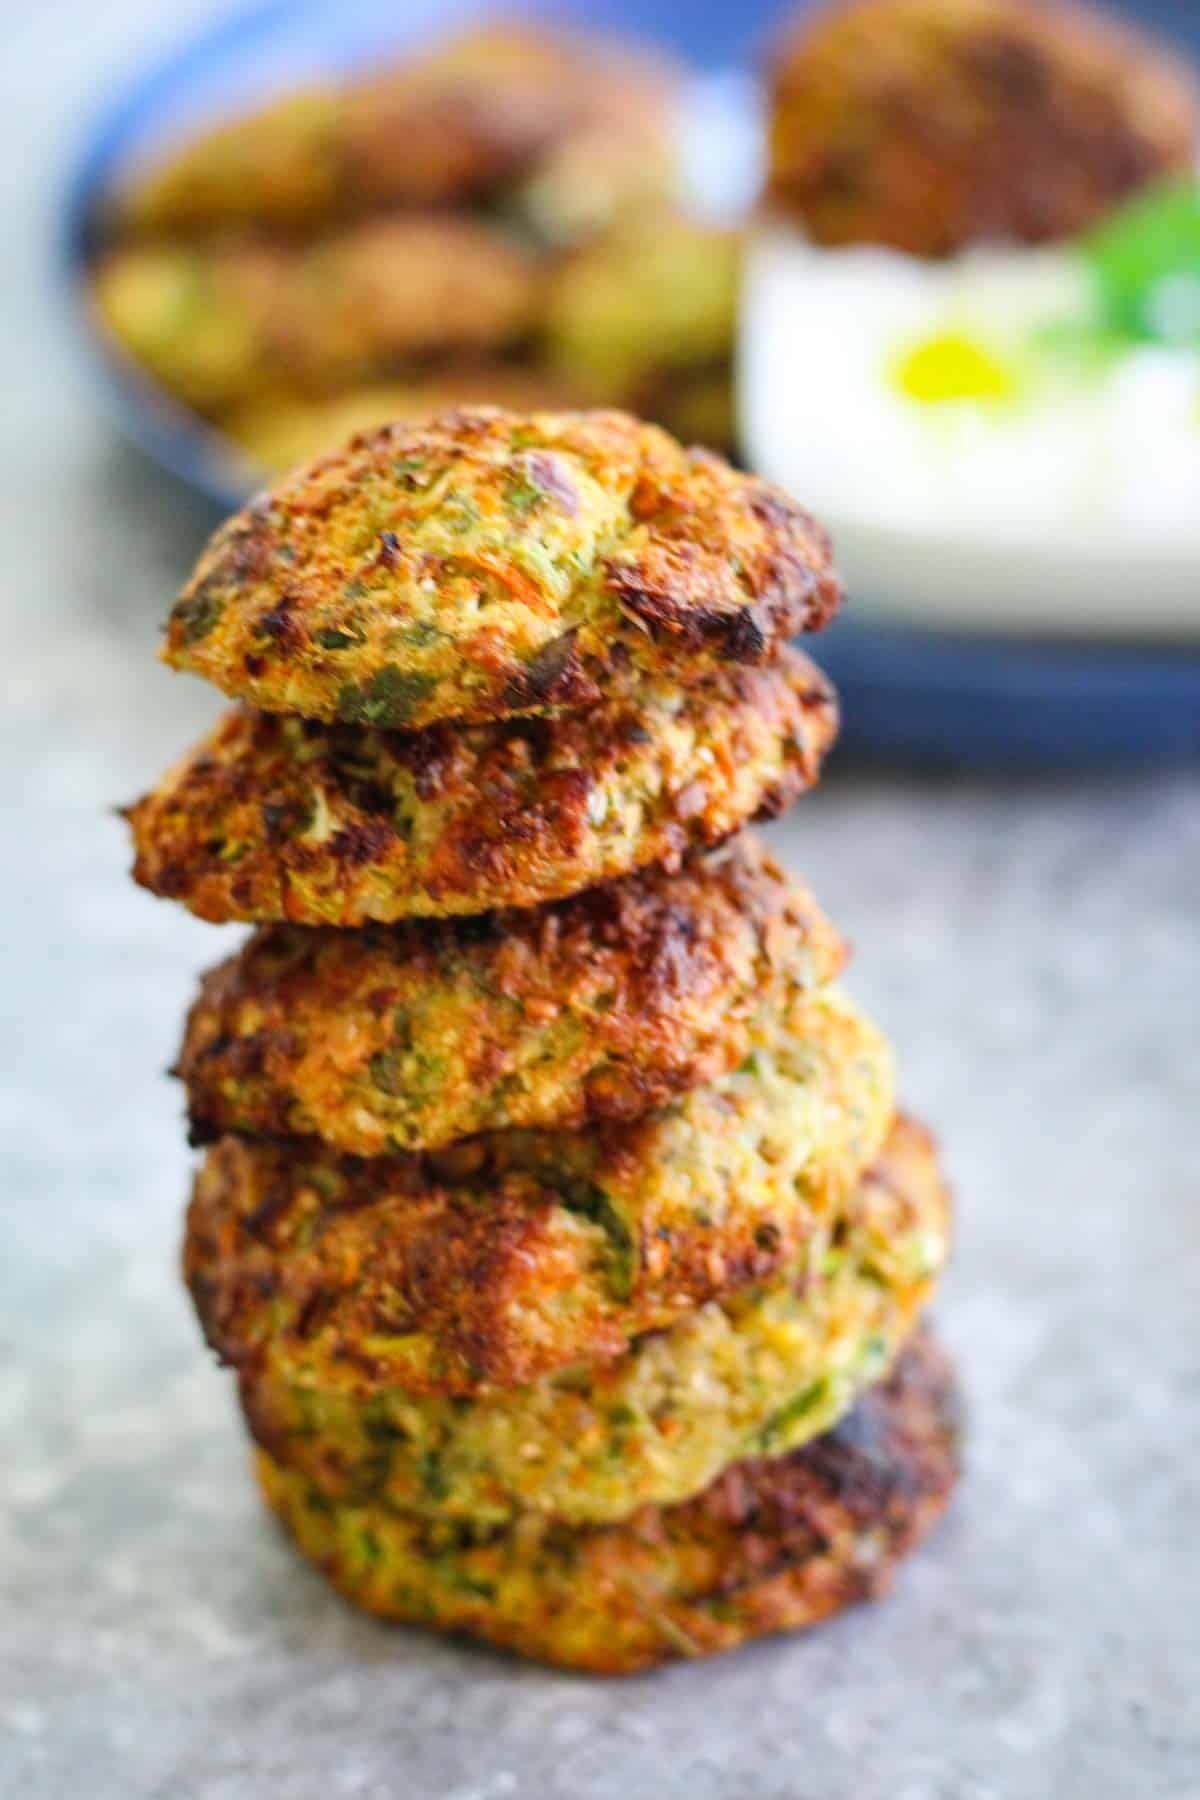 Cauliflower fritters in a tower shape over one another. In the background you can see a blurred plate with more fritters and the dip.